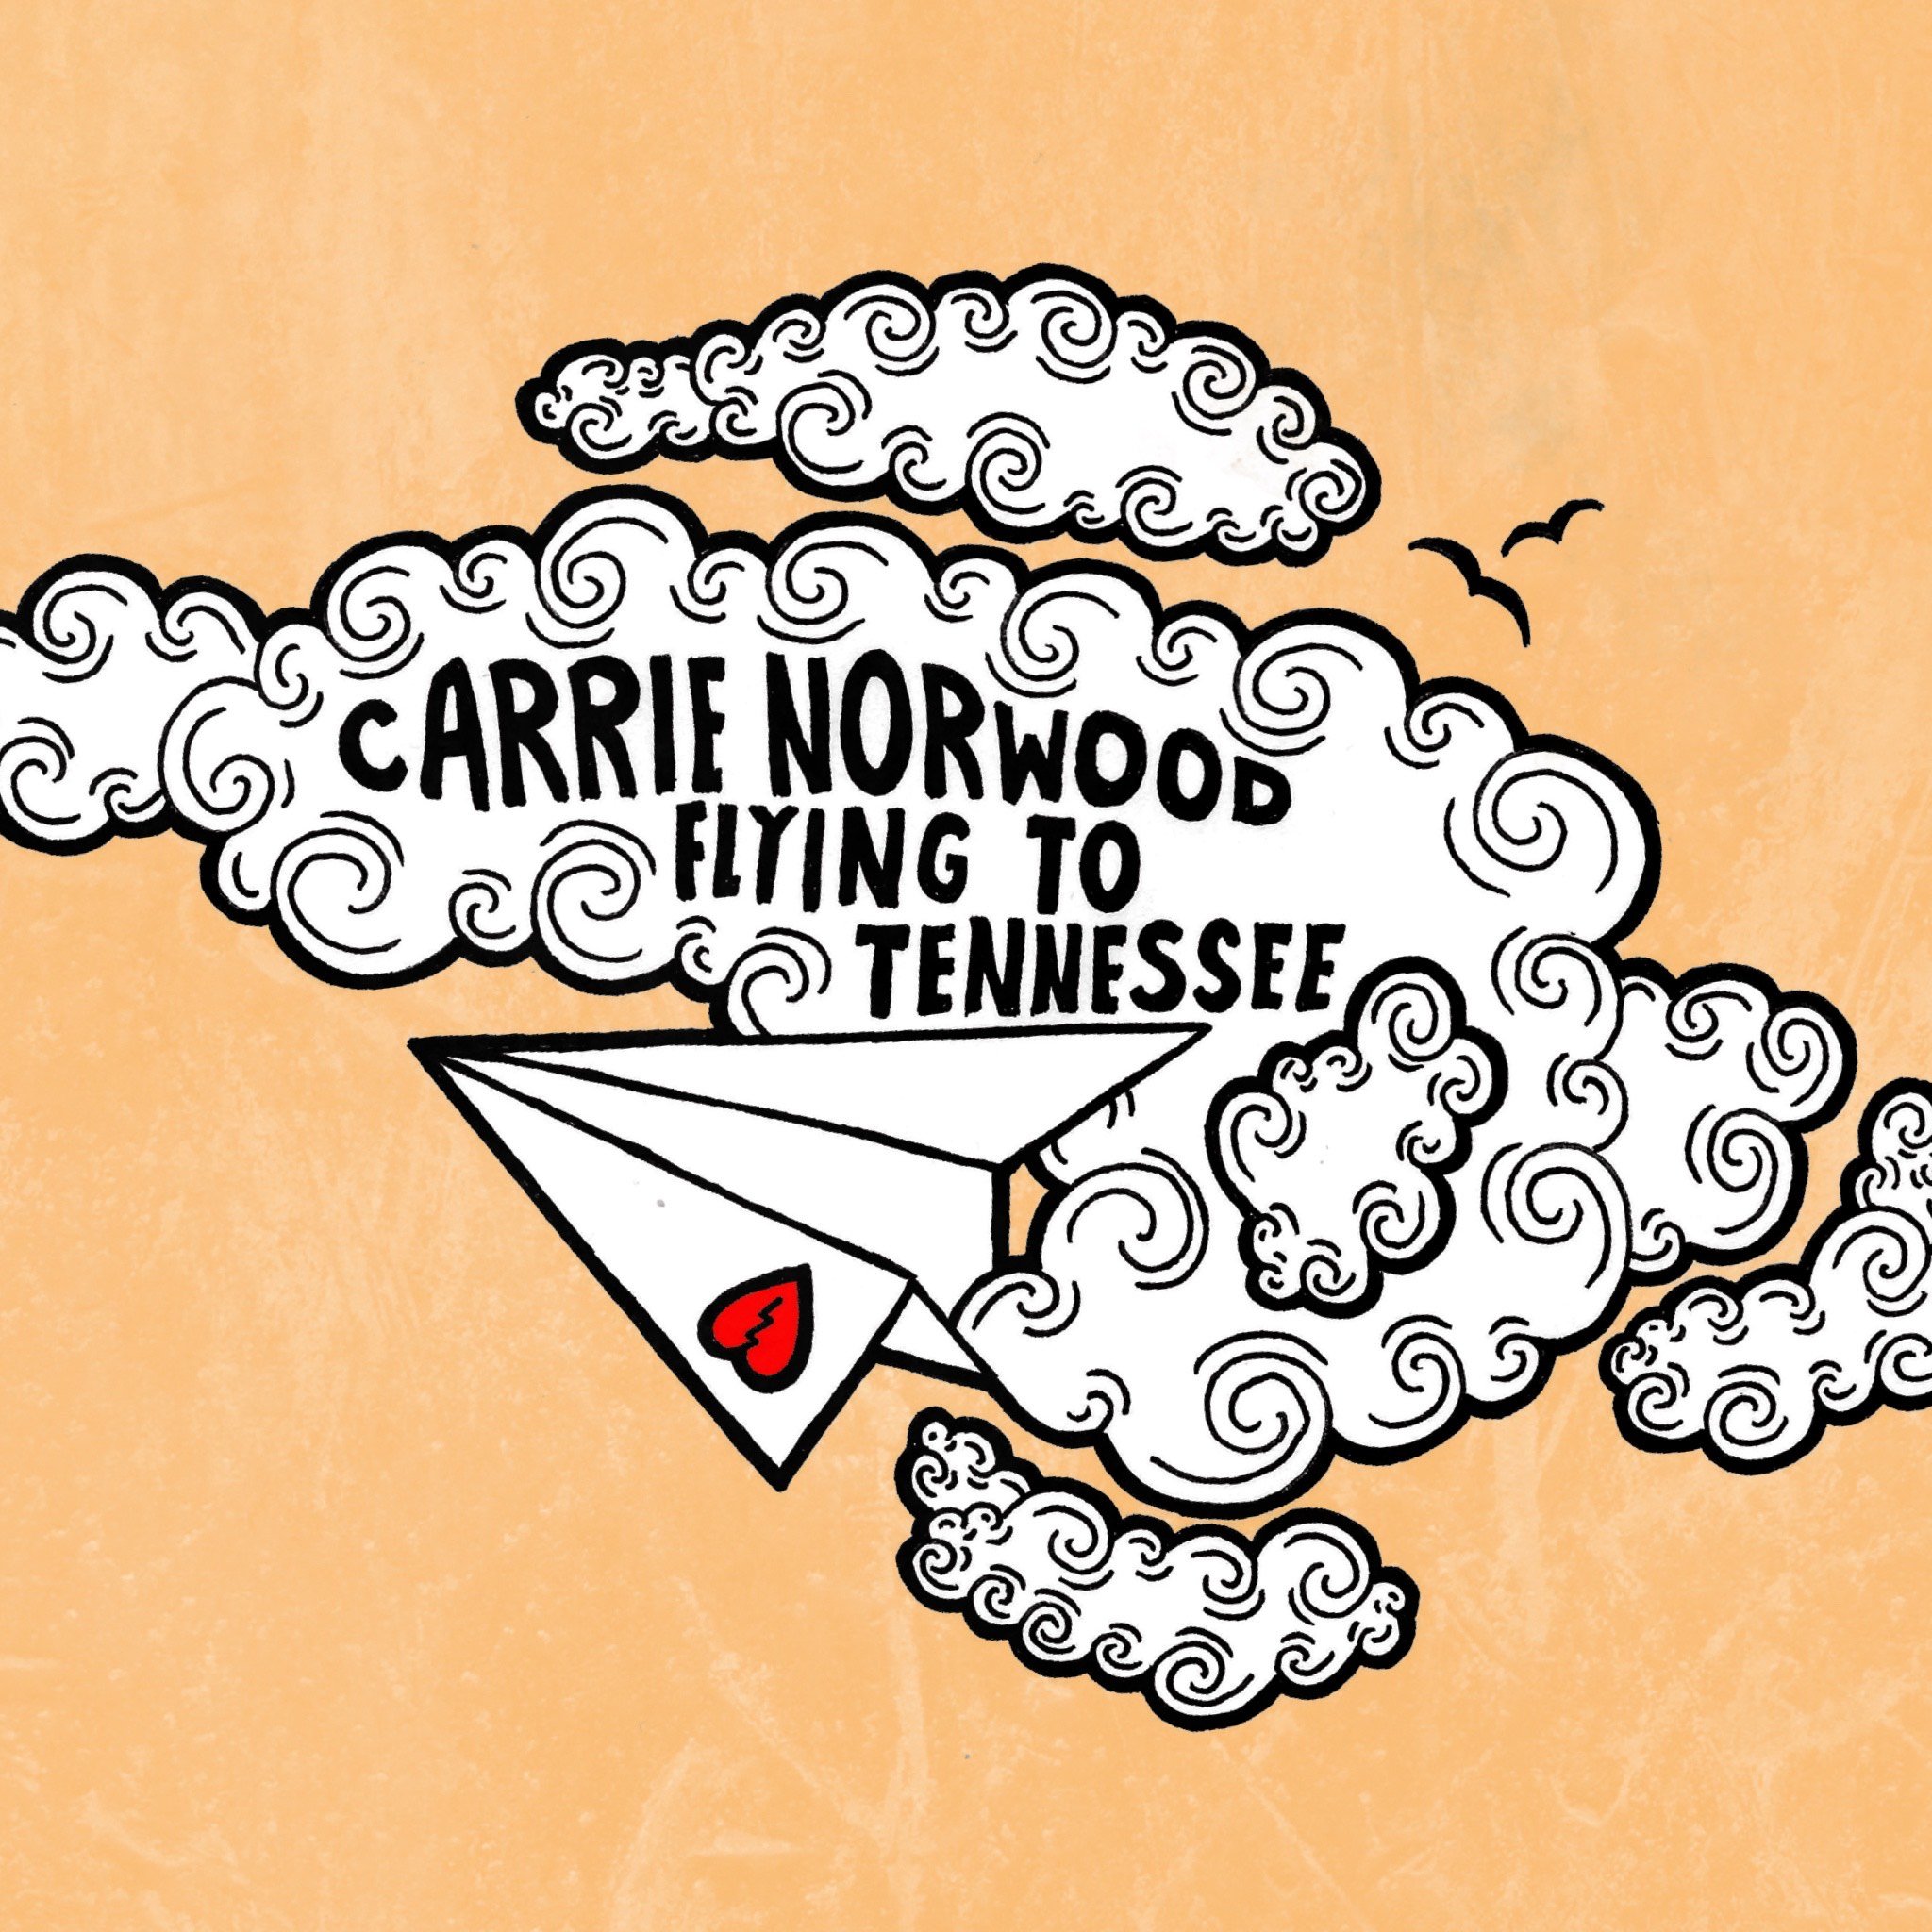 Carrie Norwood "Flying To Tennessee" Single Cover